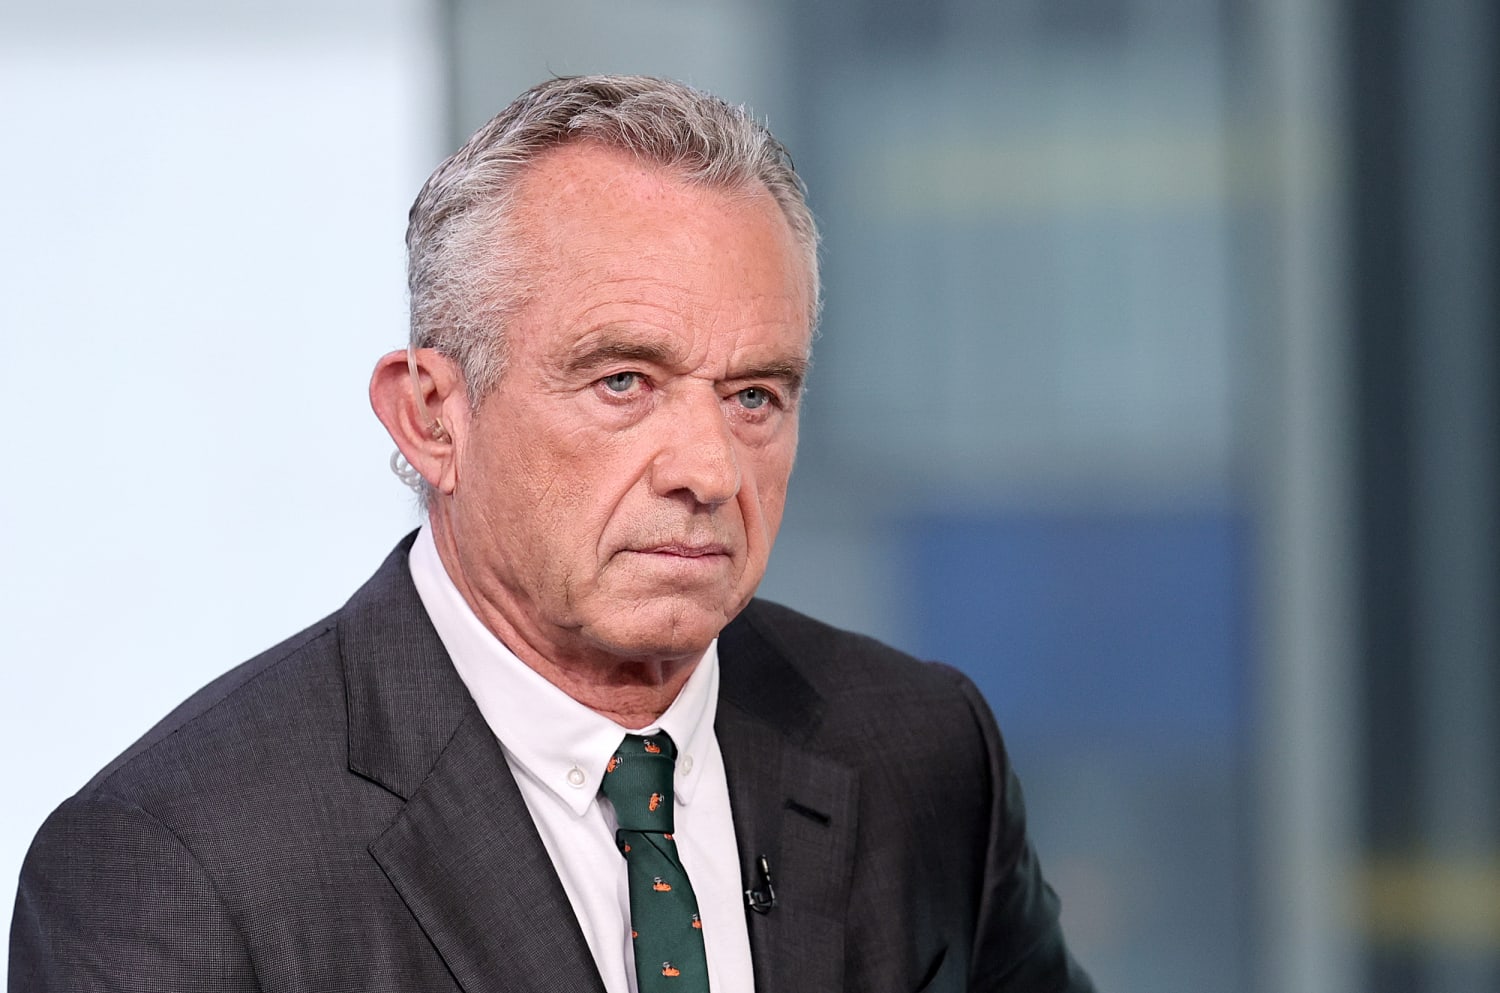 RFK Jr. pushes back on report he said Covid-19 was ethnically targeted to spare Jews